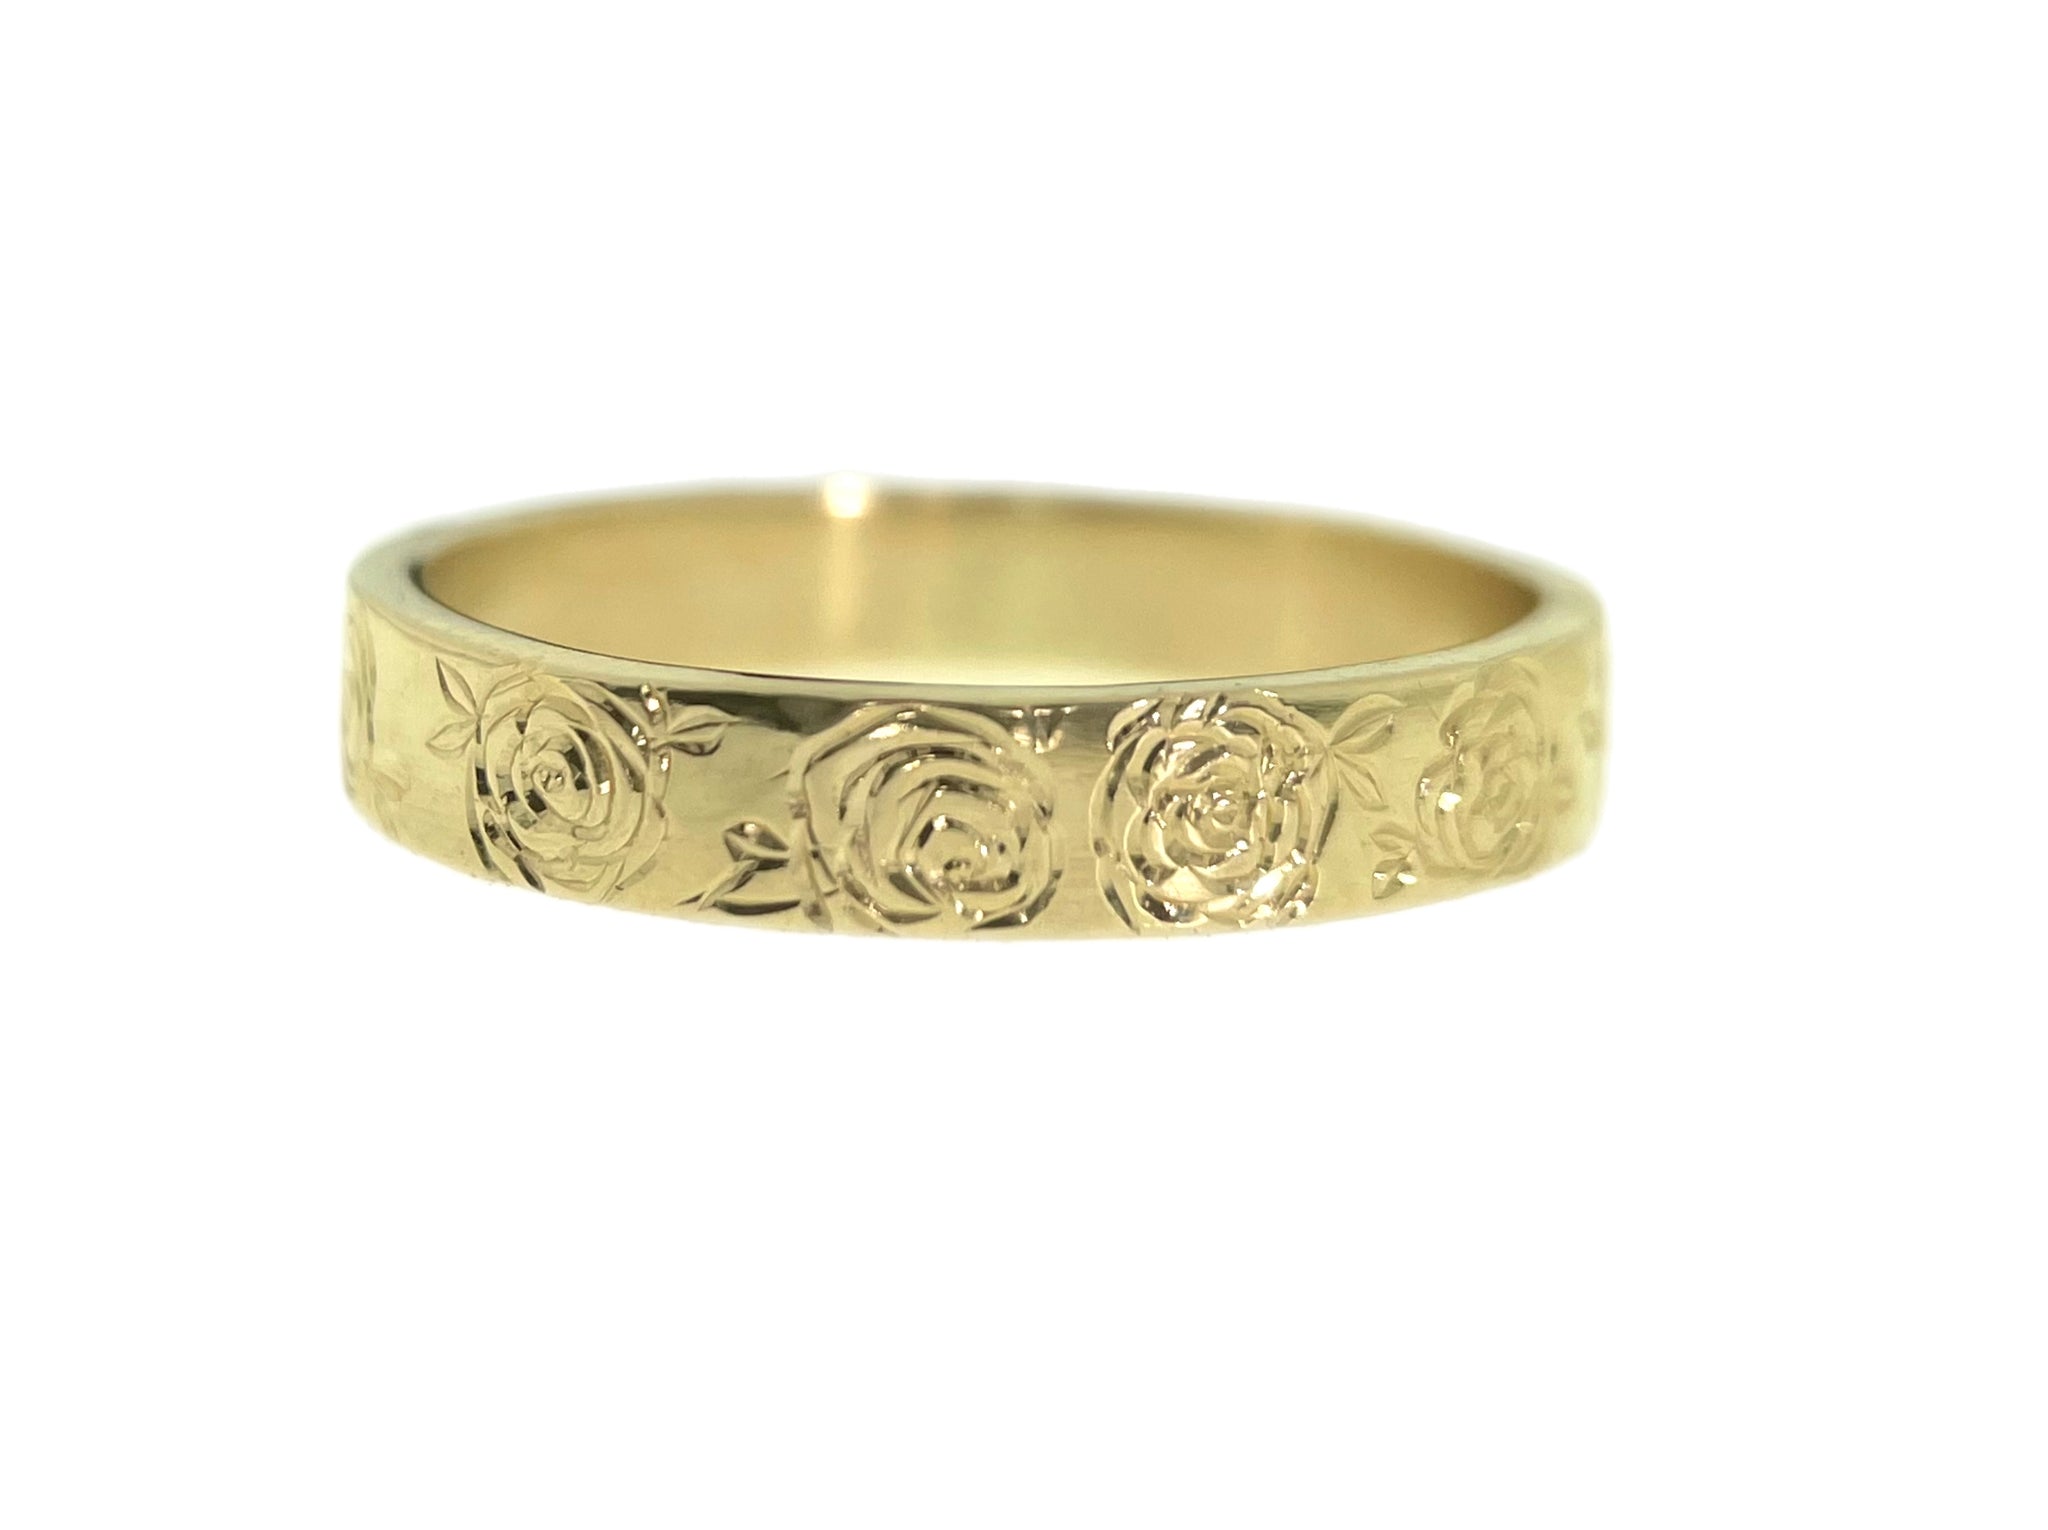 Hand engraved rose band